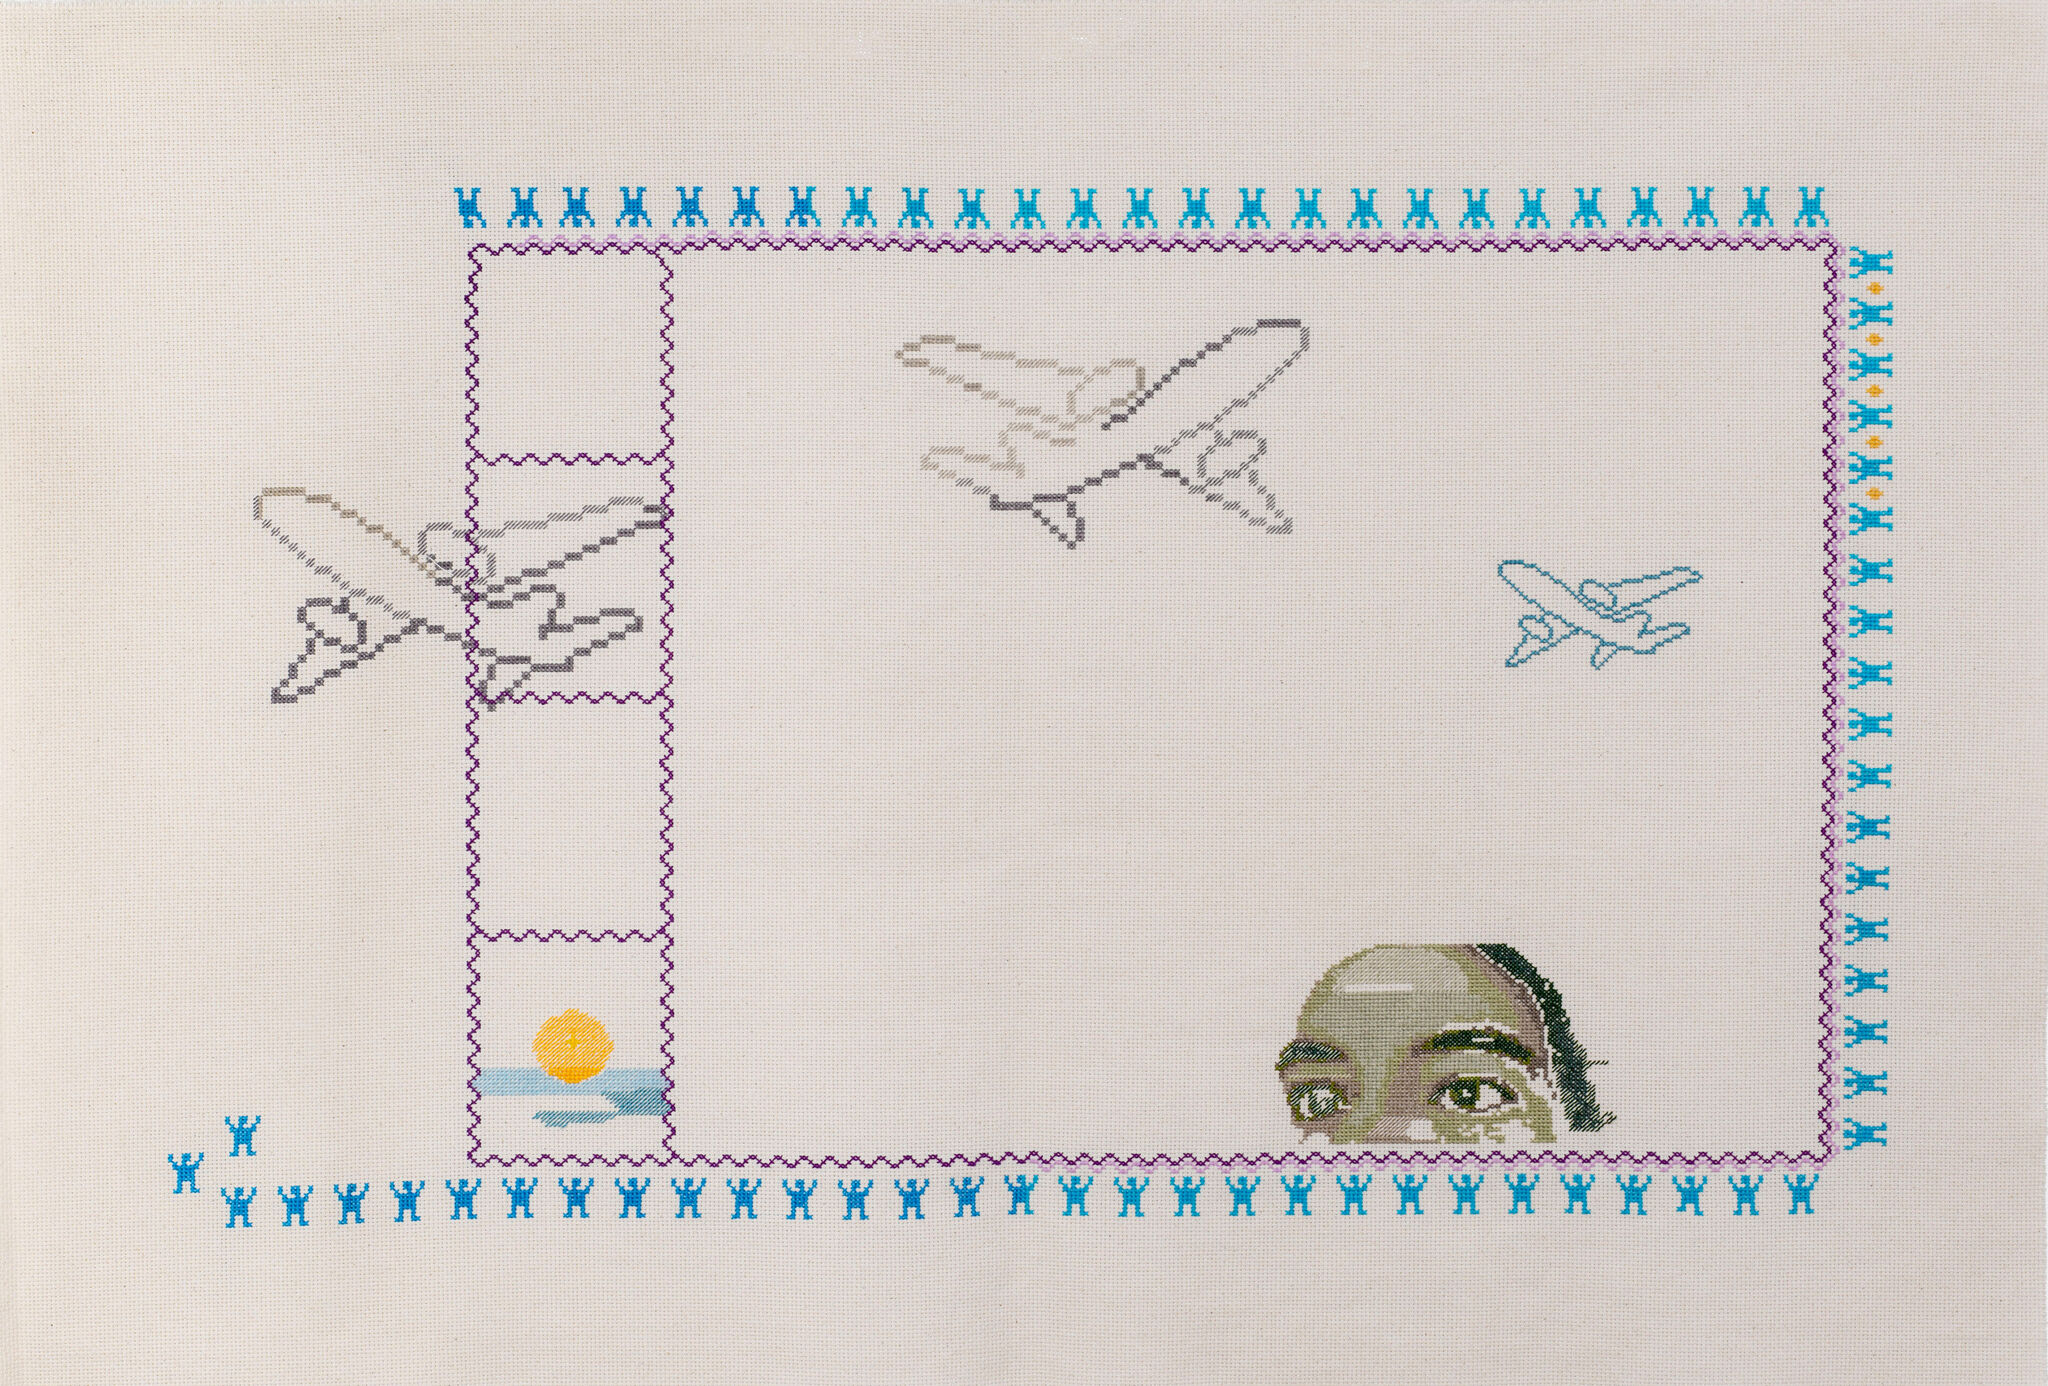 Thread embroidered on cloth to show planes and a face peering up at them.